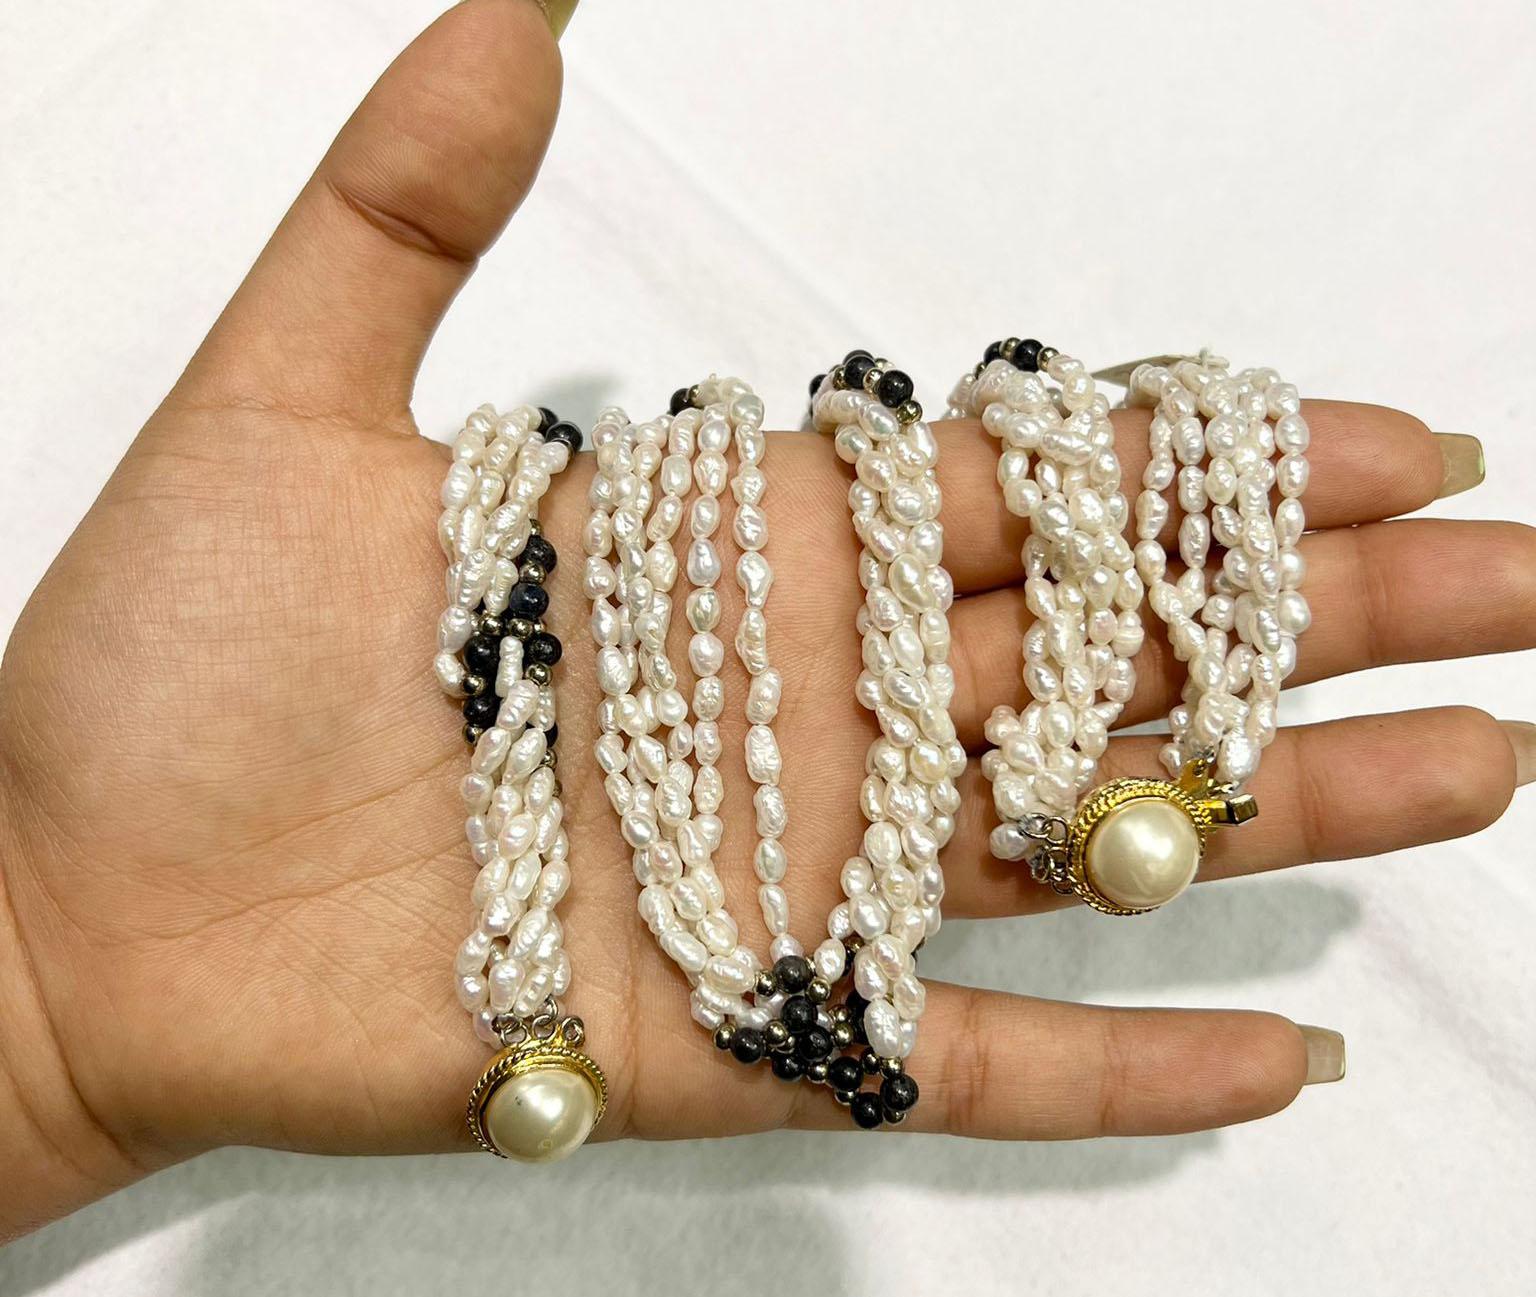 Set of Necklace and Bracelet Freshwater Pearls with Mabe Pearl Clasp Necklace 2 For Sale 4